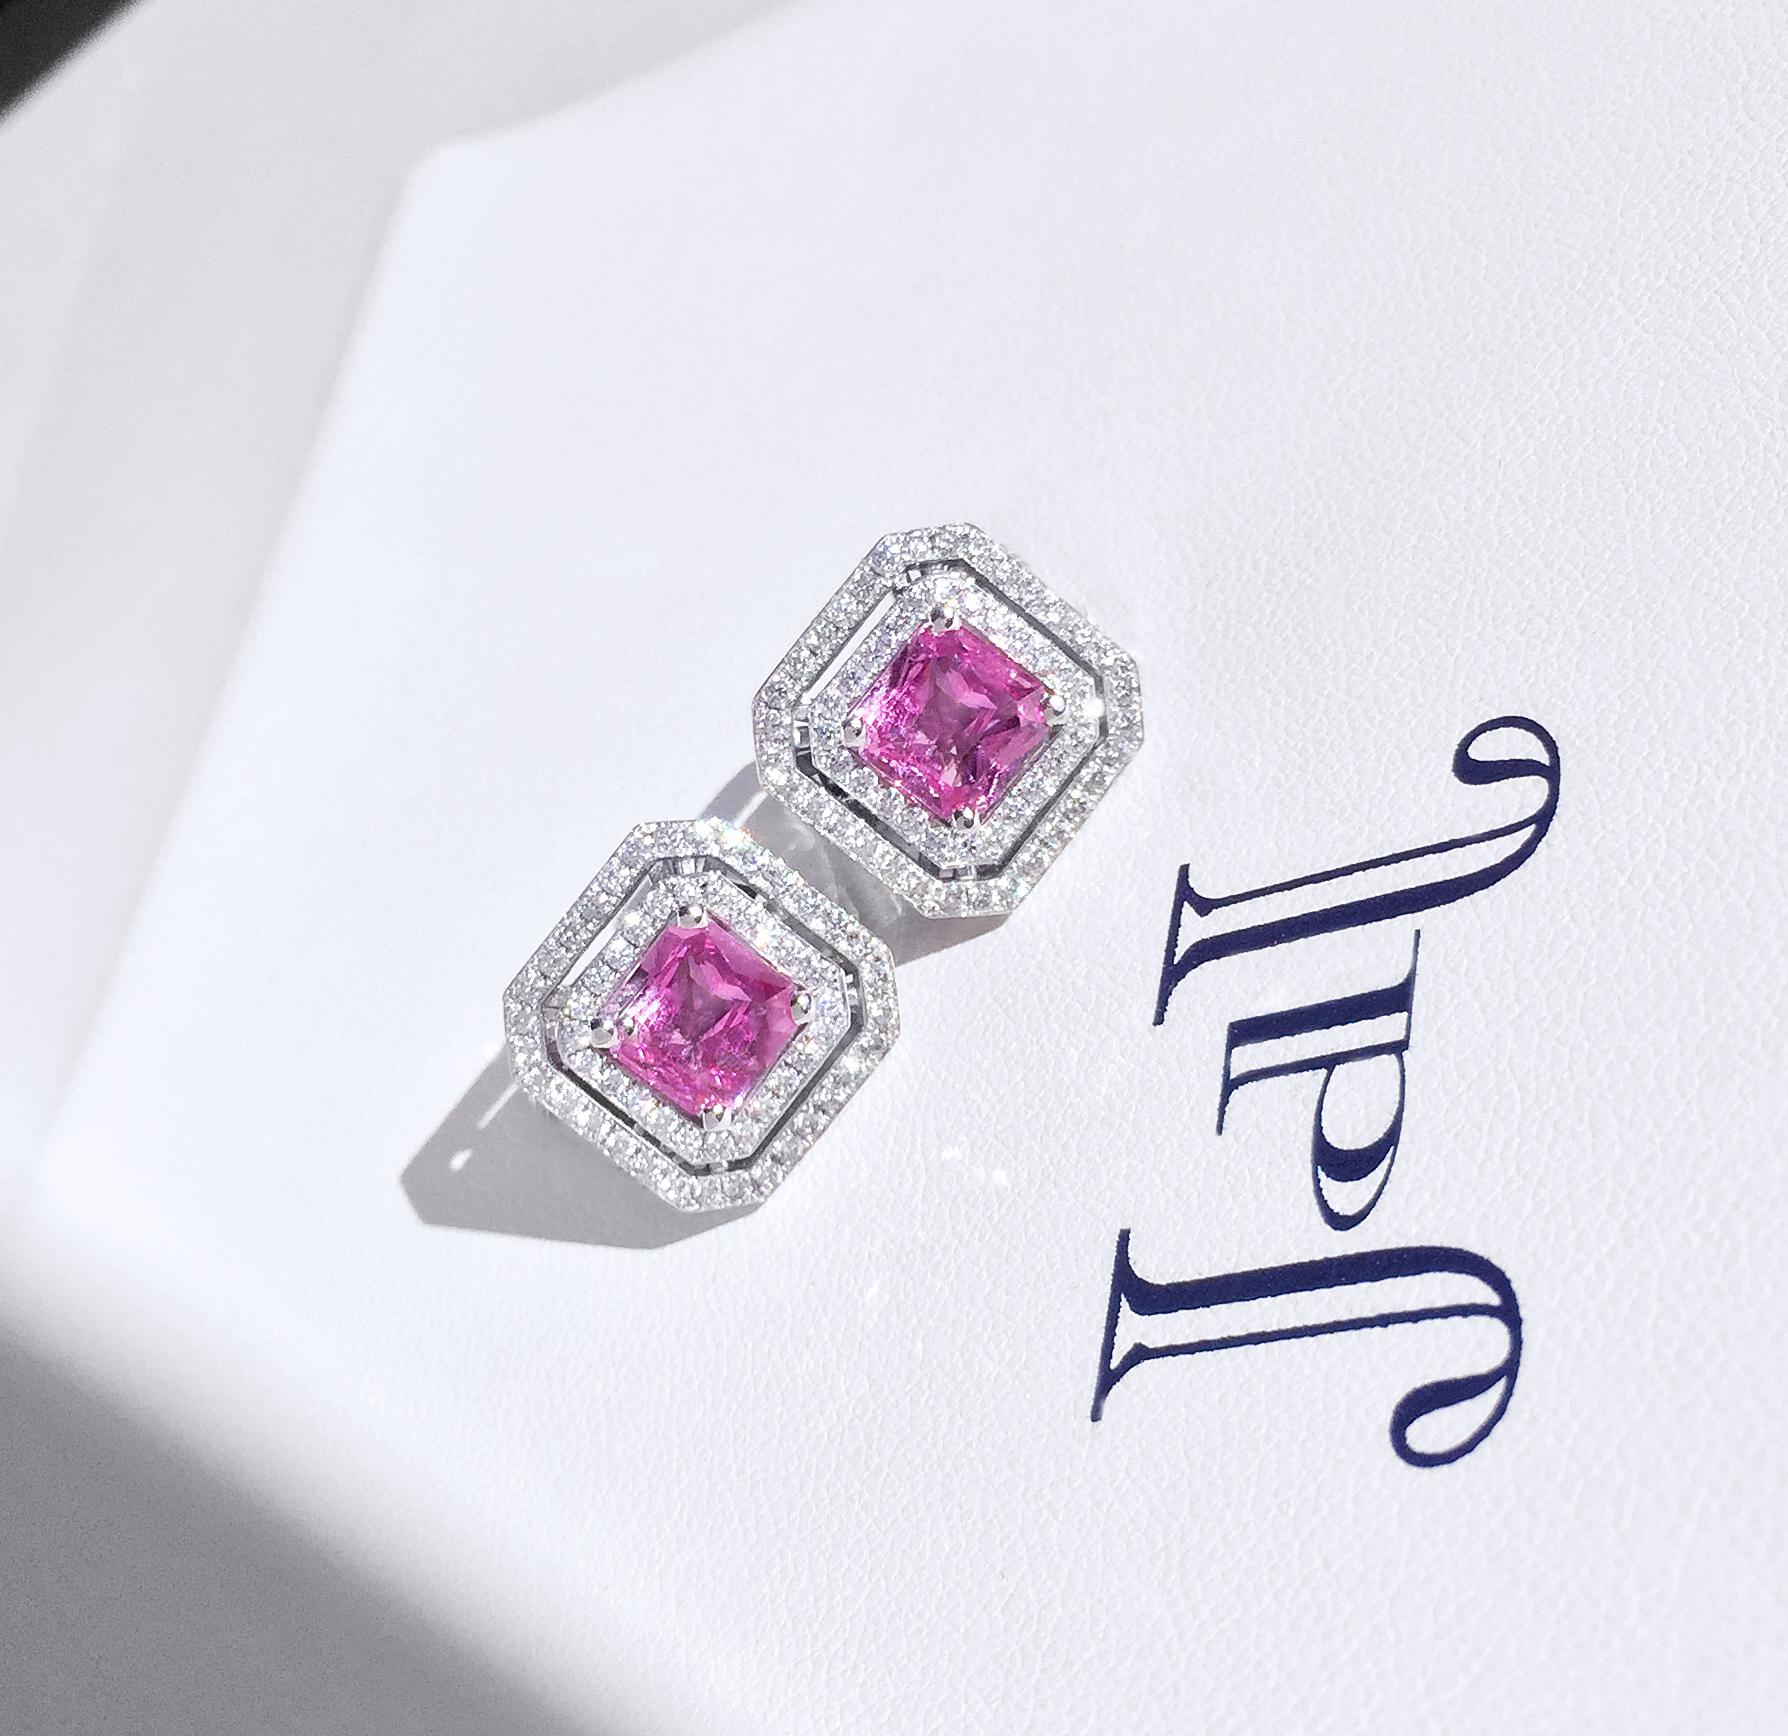 From JdJ Couture - Lively & Vibrant Radiant Cut Pink Sapphire 